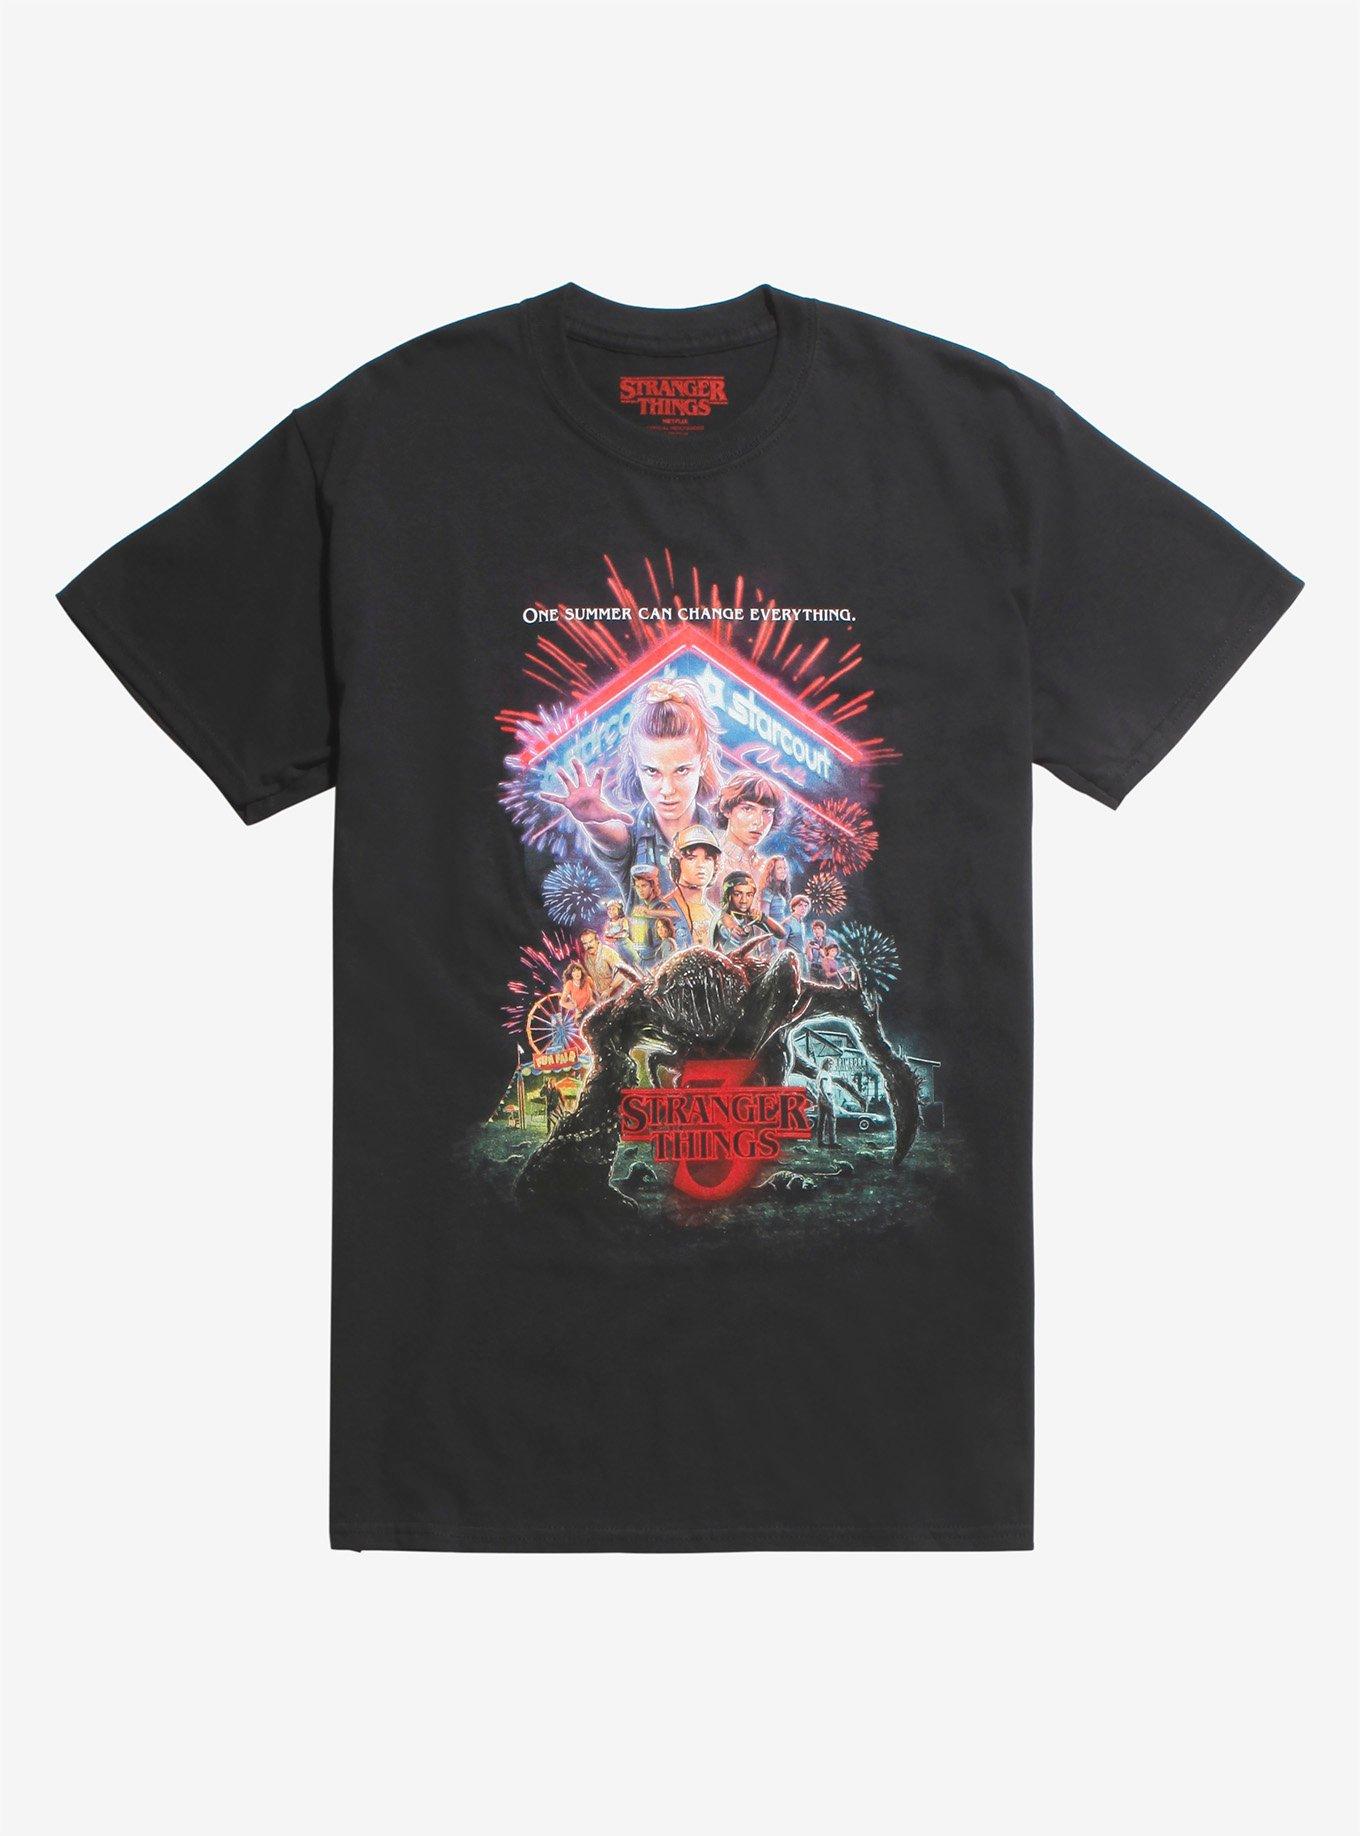 Things 3 Poster T-Shirt | Hot Topic